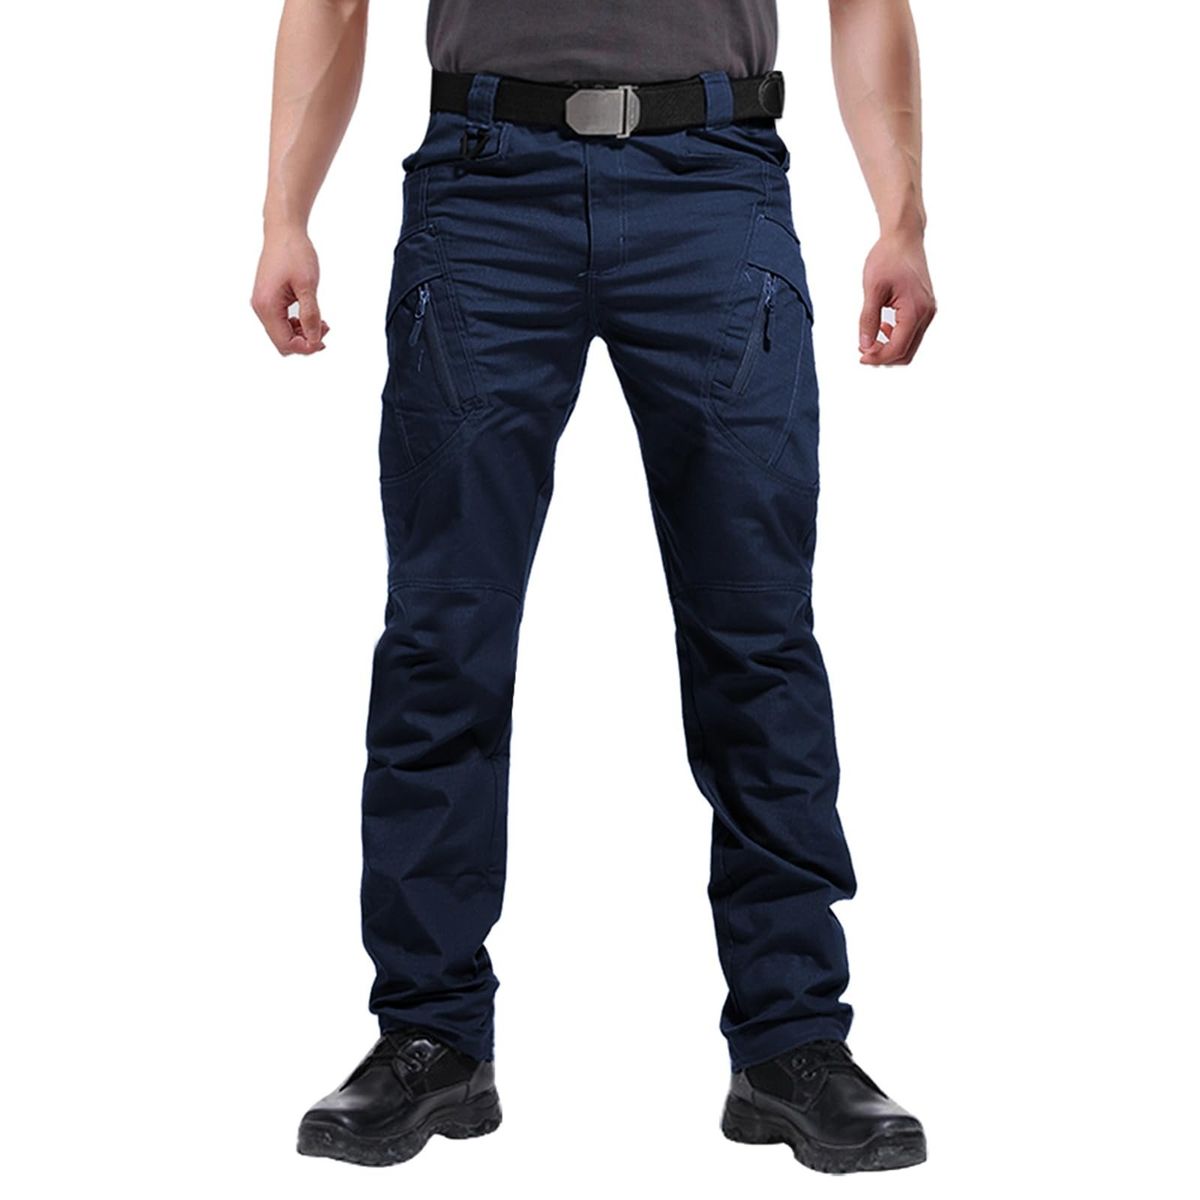  Hiwise Mens Ripstop Tactical Pants Water Resistant